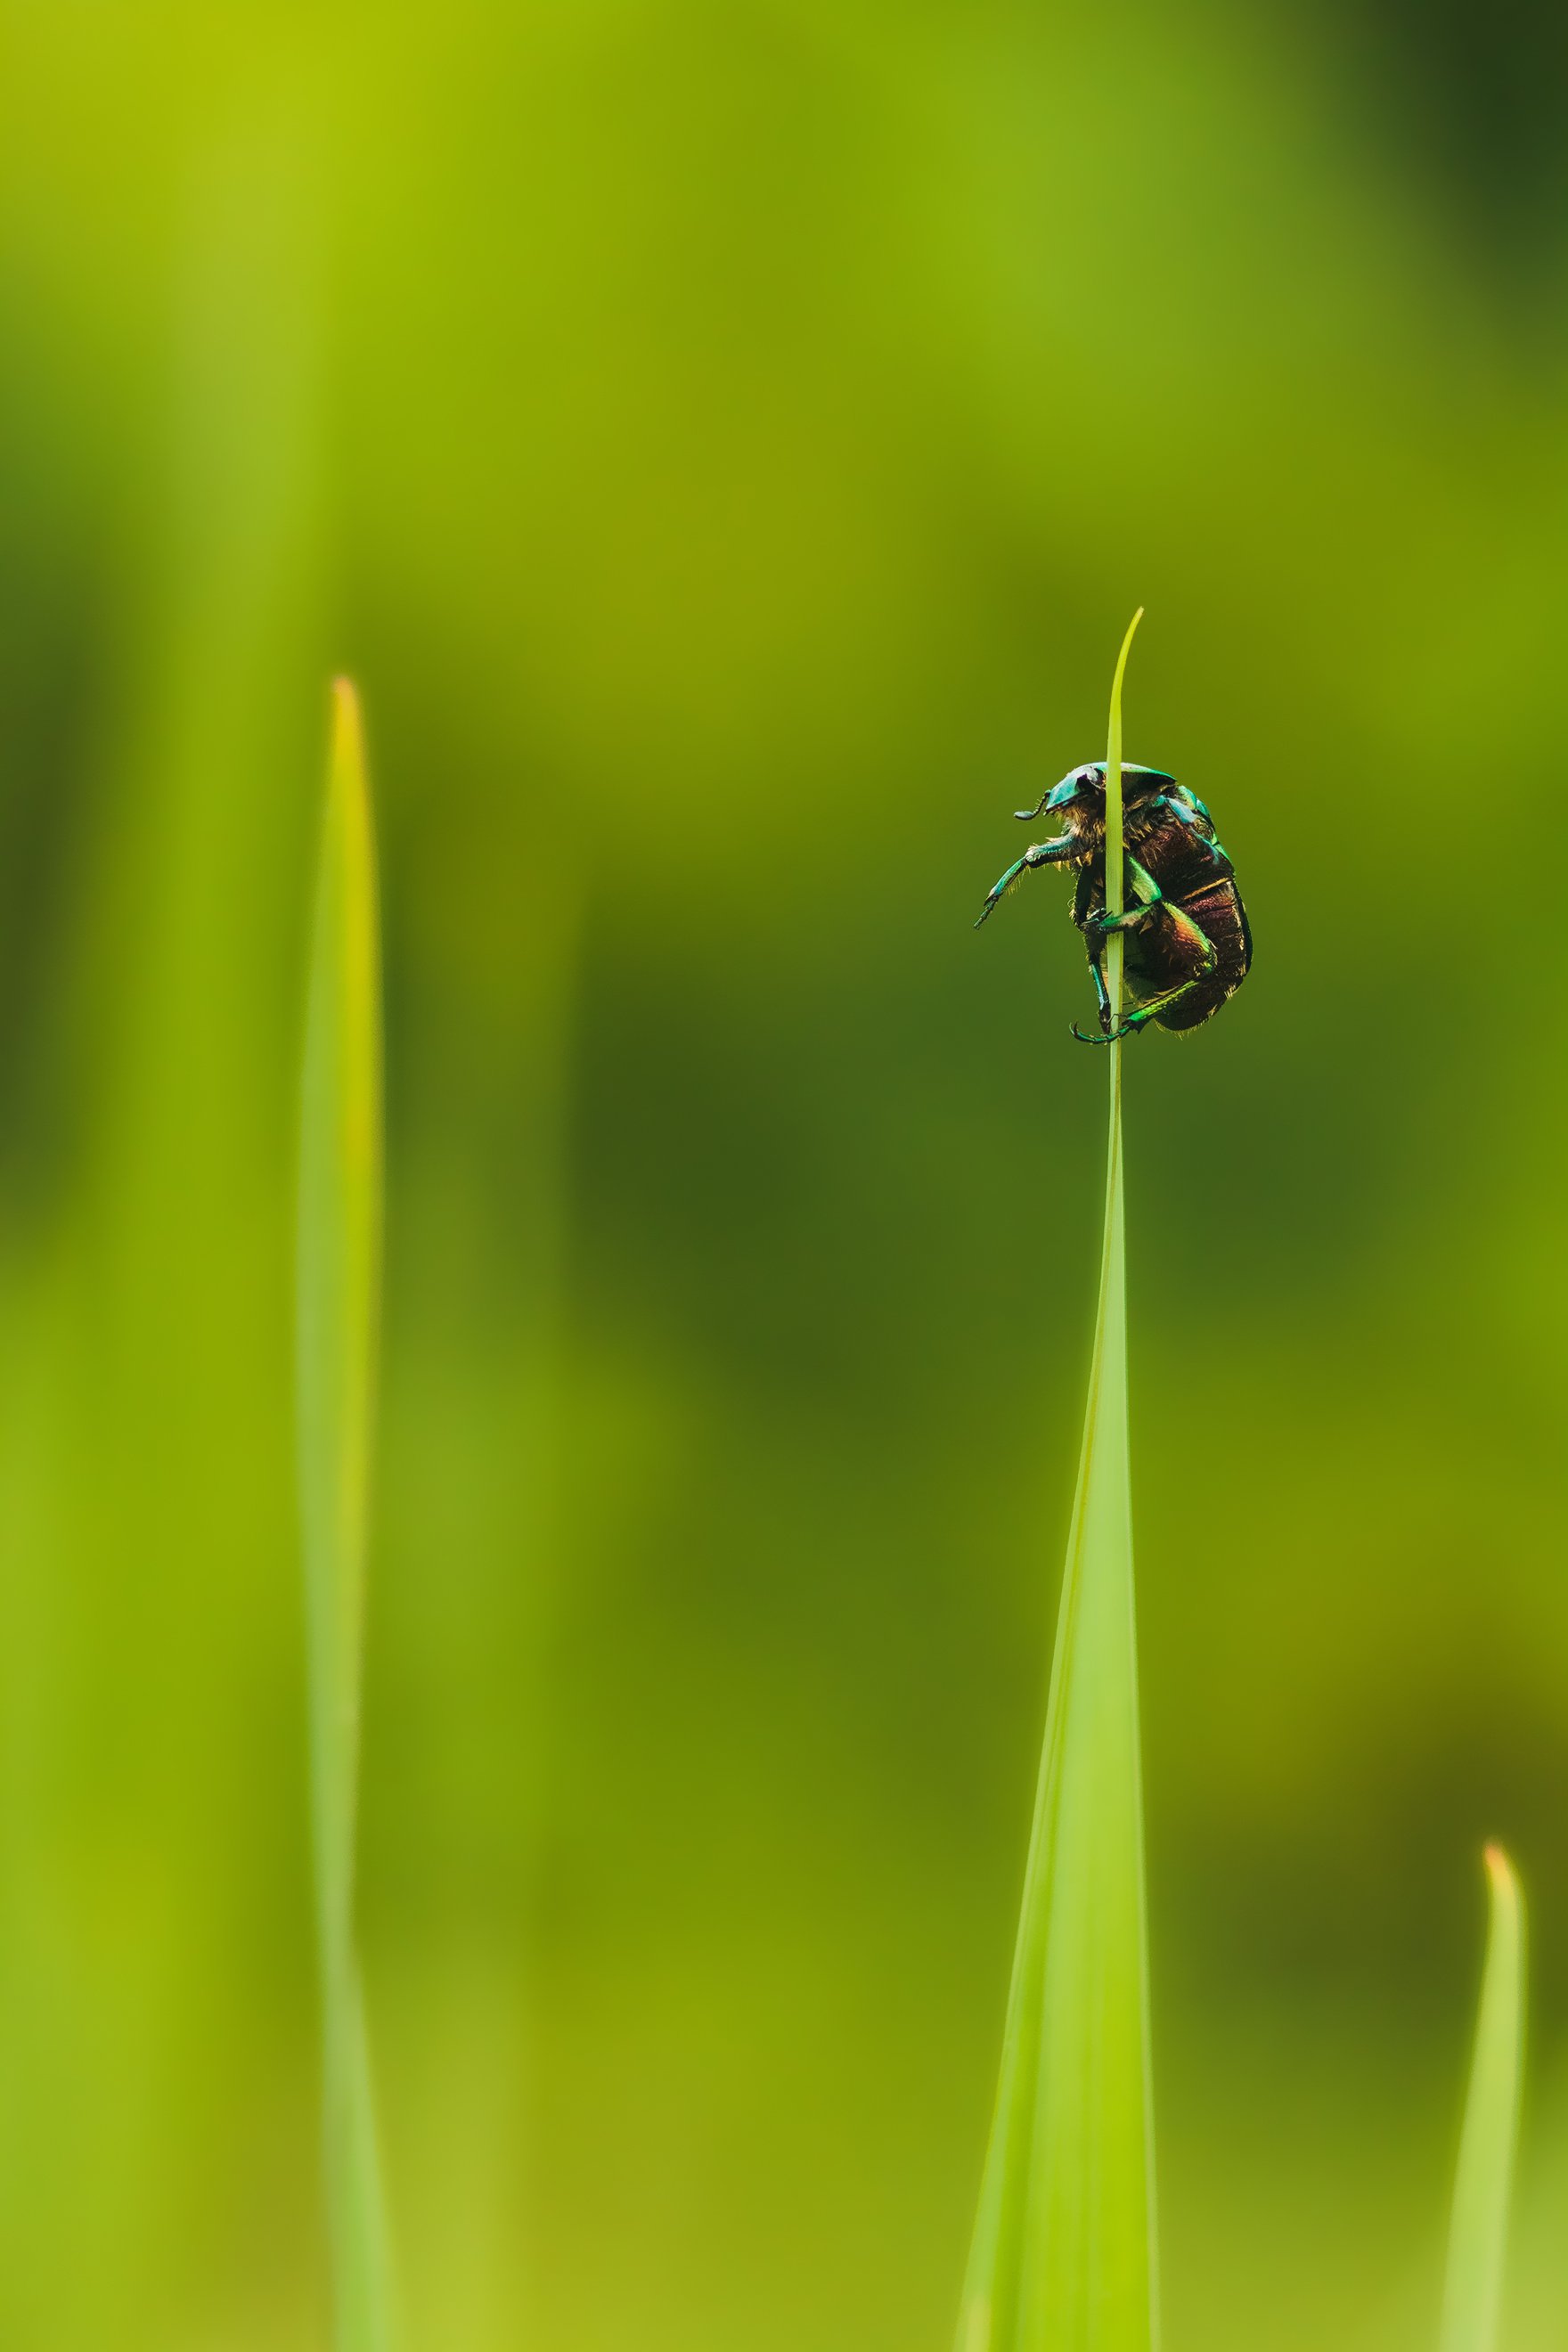 bug, macro, may, beetle, green, observer, travel, live, portrait, yellow, bokeh, environment, observe, grass, up, watch, summer, summertime, emerald, lookout, watchman, sentinel, mast, pole, nature, blade, purposeful, ambitious, dexterity, adroitness, Денис Ганенко